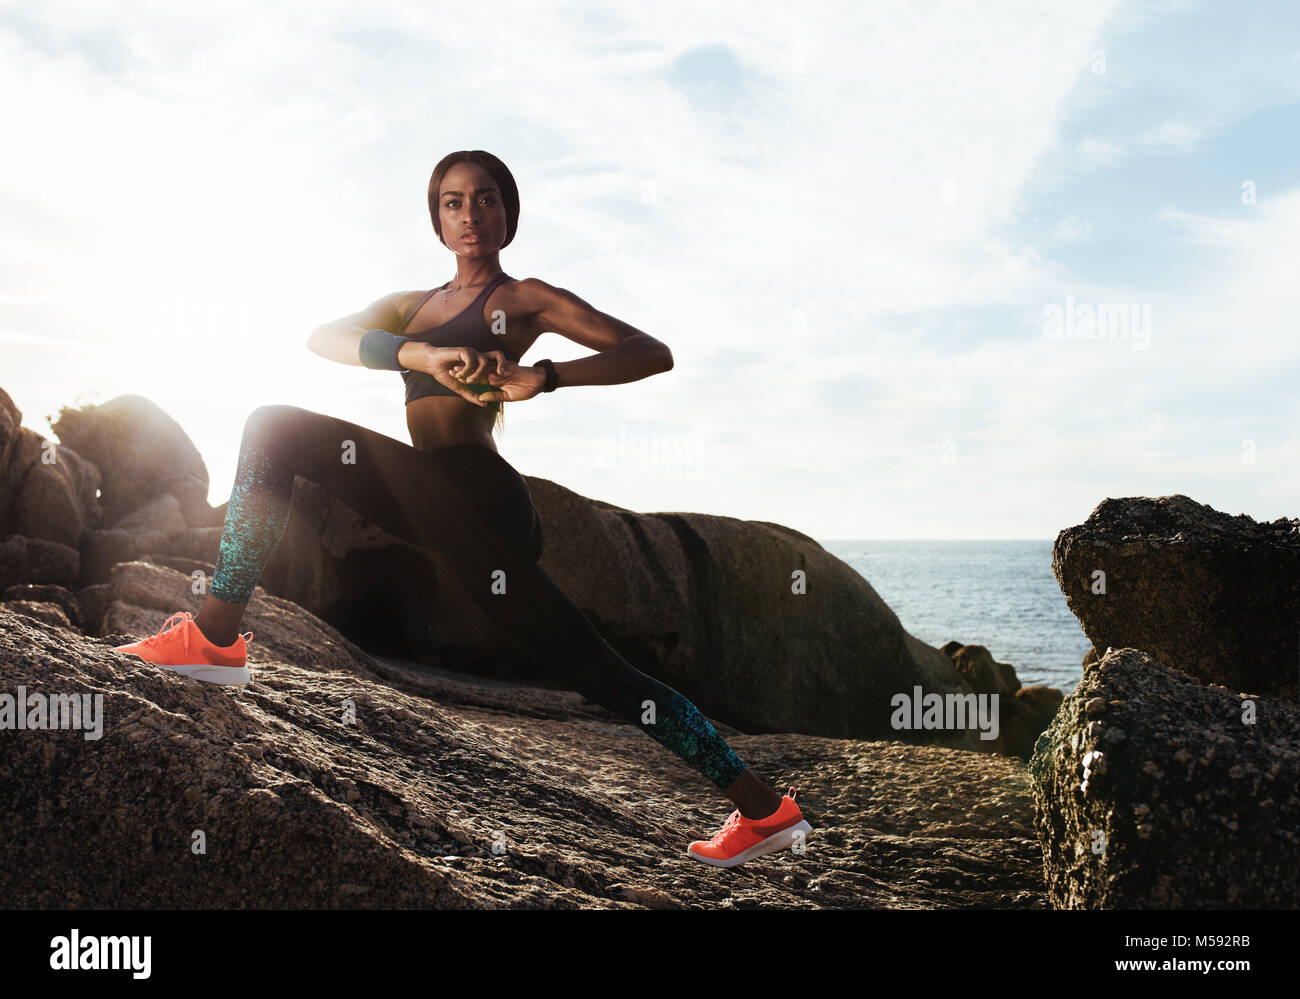 Fit young female runner doing stretches. Young woman stretching outdoors on rocks at beach. Stock Photo